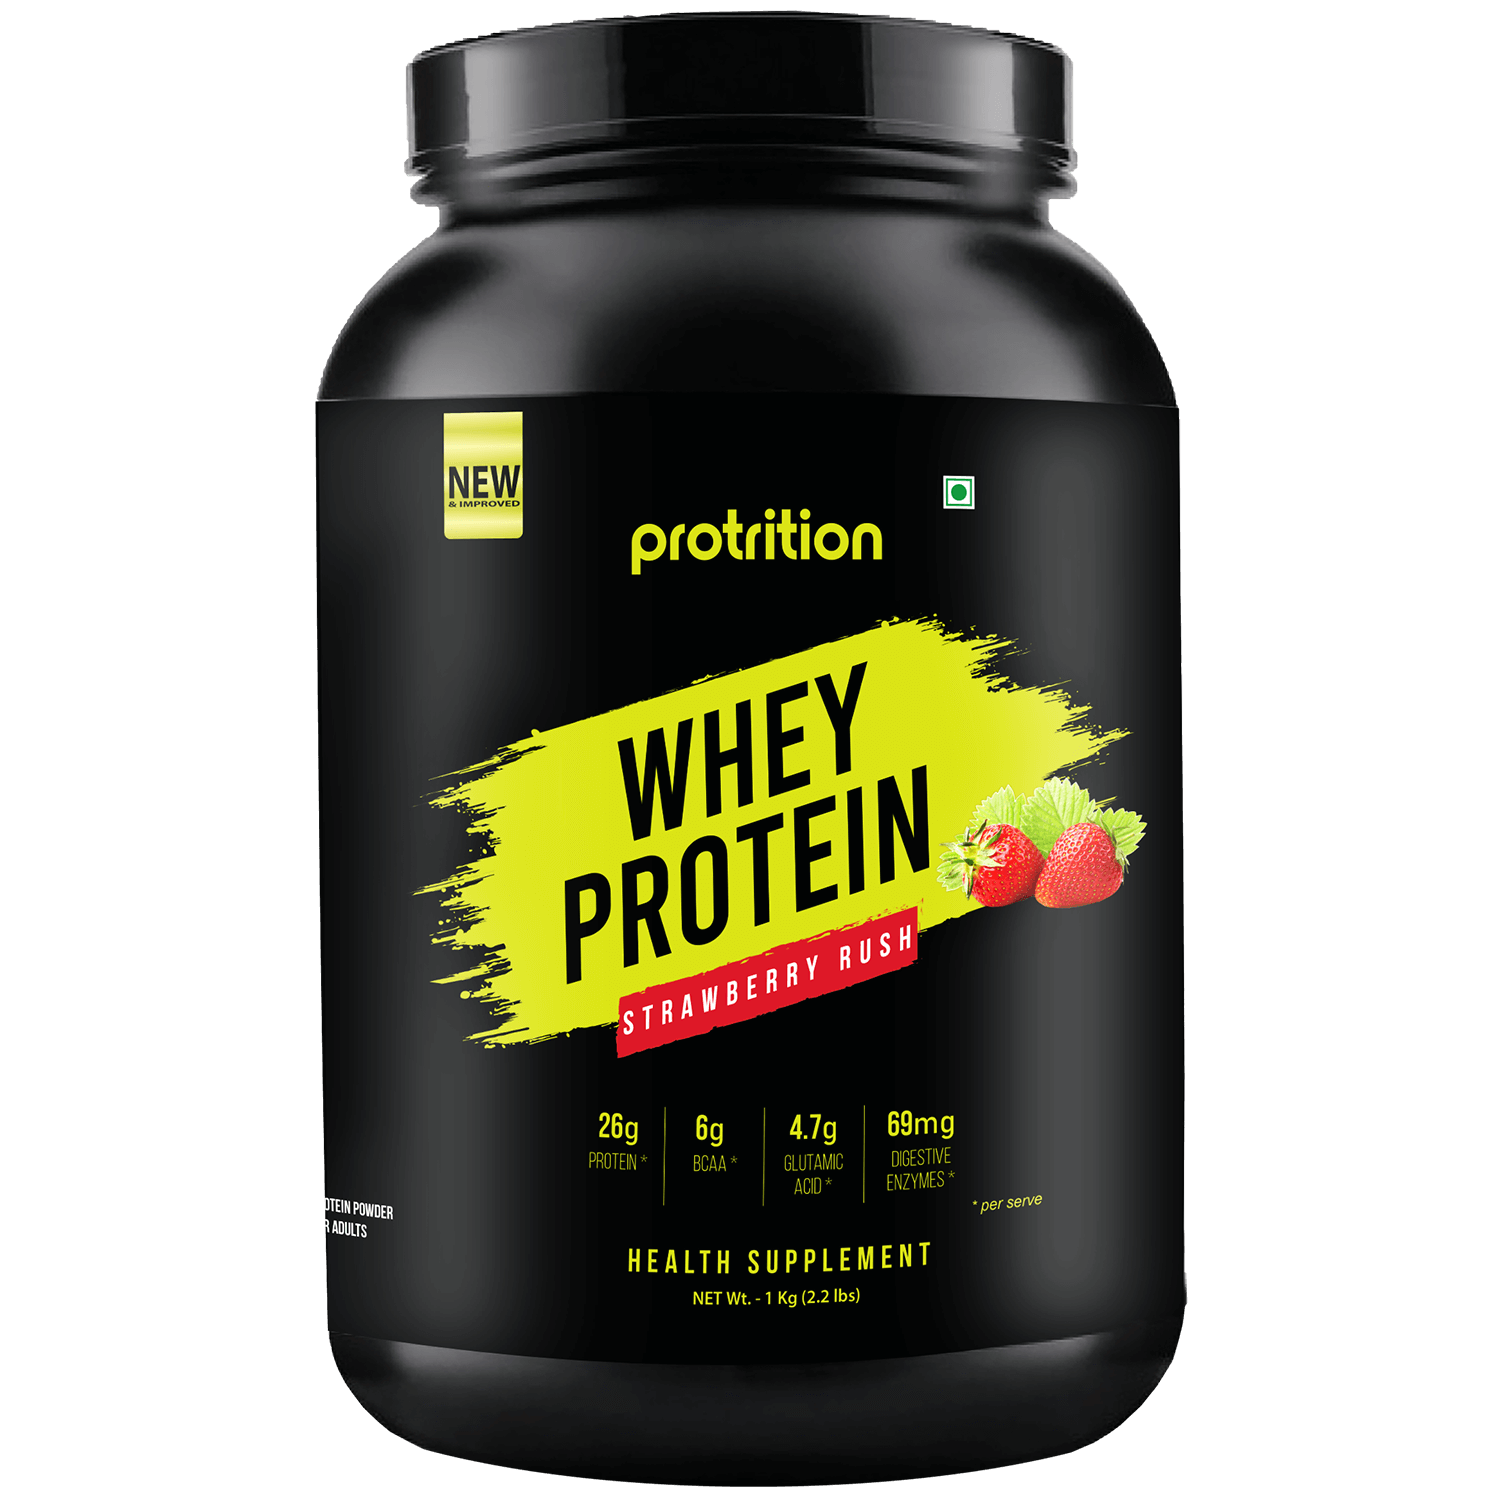 Protrition Whey Protein, 1Kg, Strawberry Rush